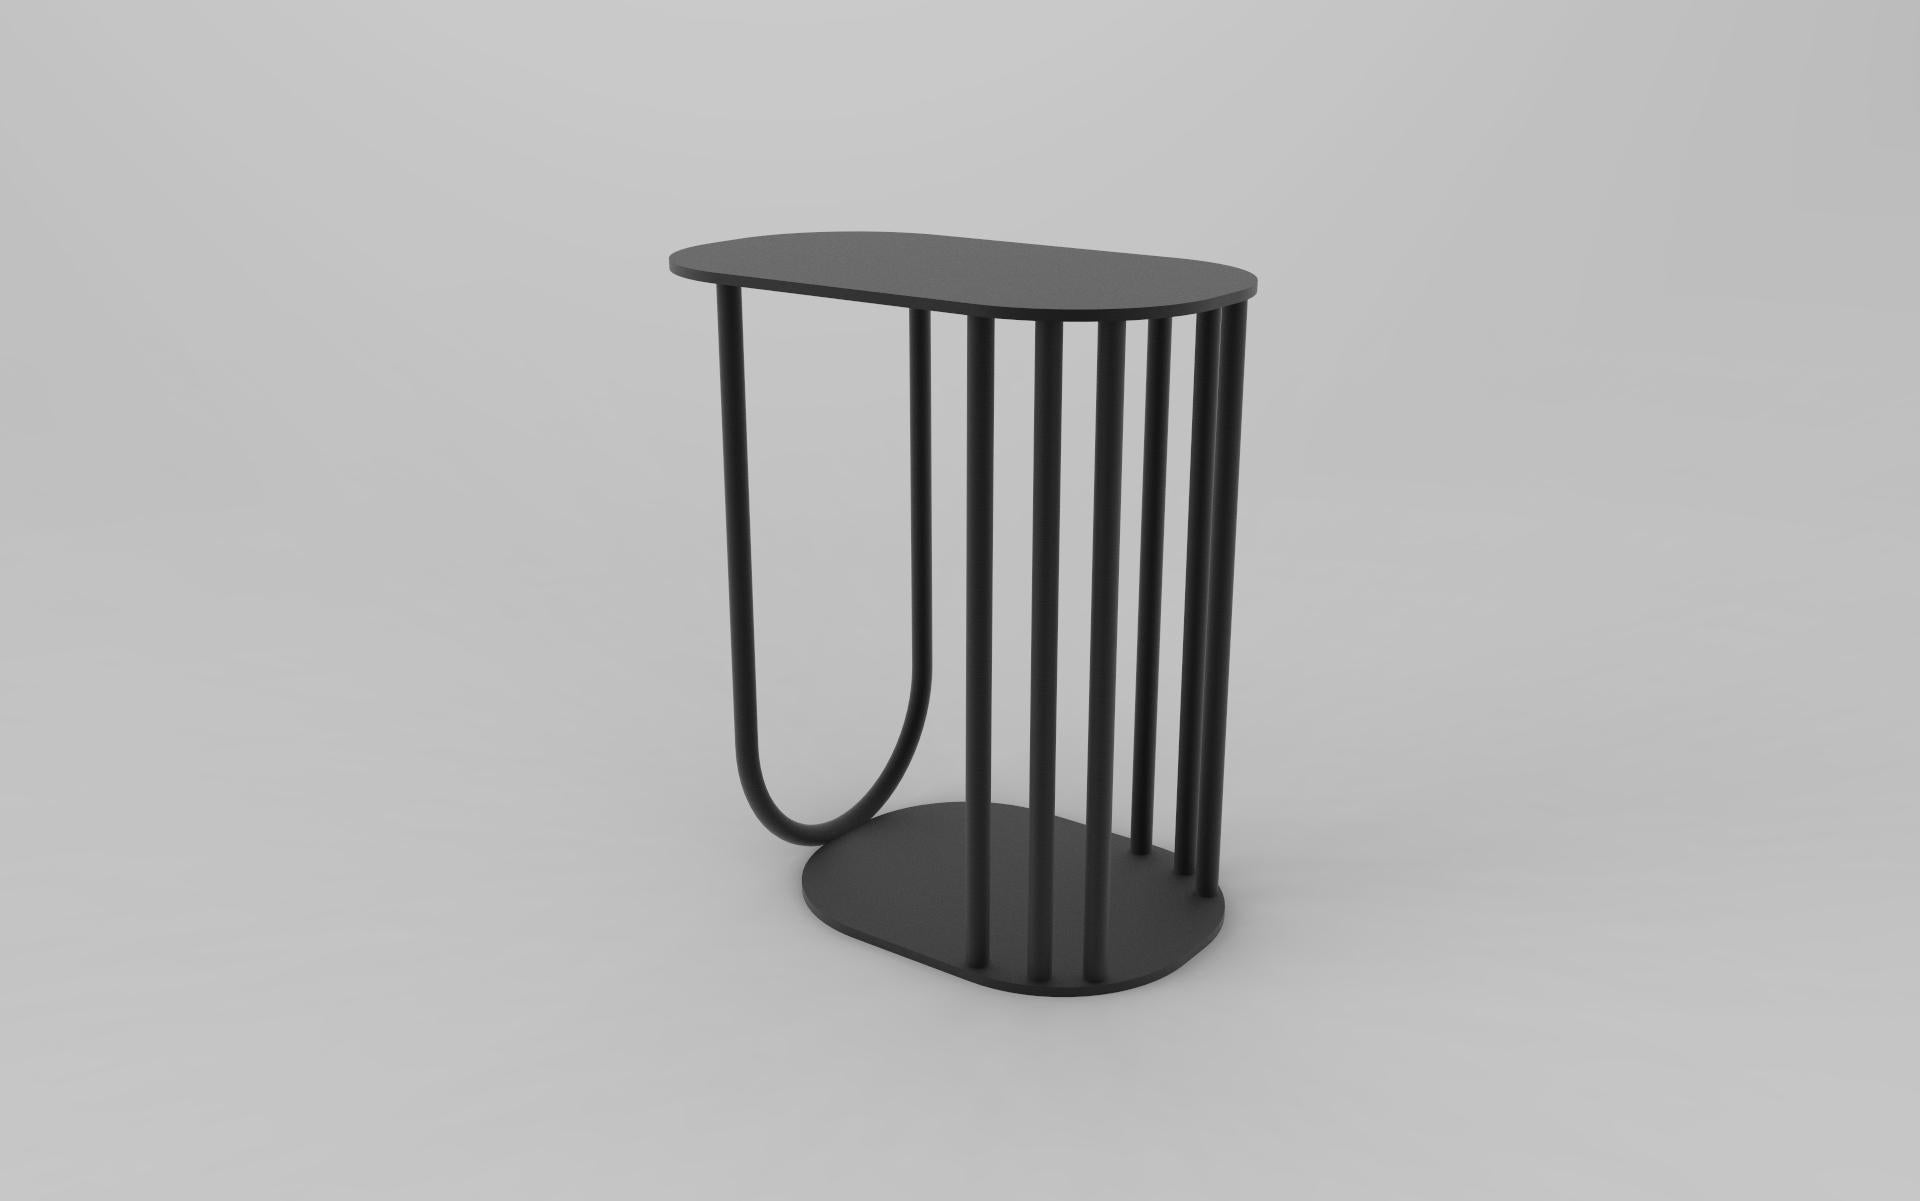 Atlantis side table by Studio Laf 
Dimensions: L 40 cm x W 23 x H 44 cm
Materials: Metal
Also Available in two different materials: Black Metal or Brass


It emerged with a combination of simple linear movements and timeless forms. It is